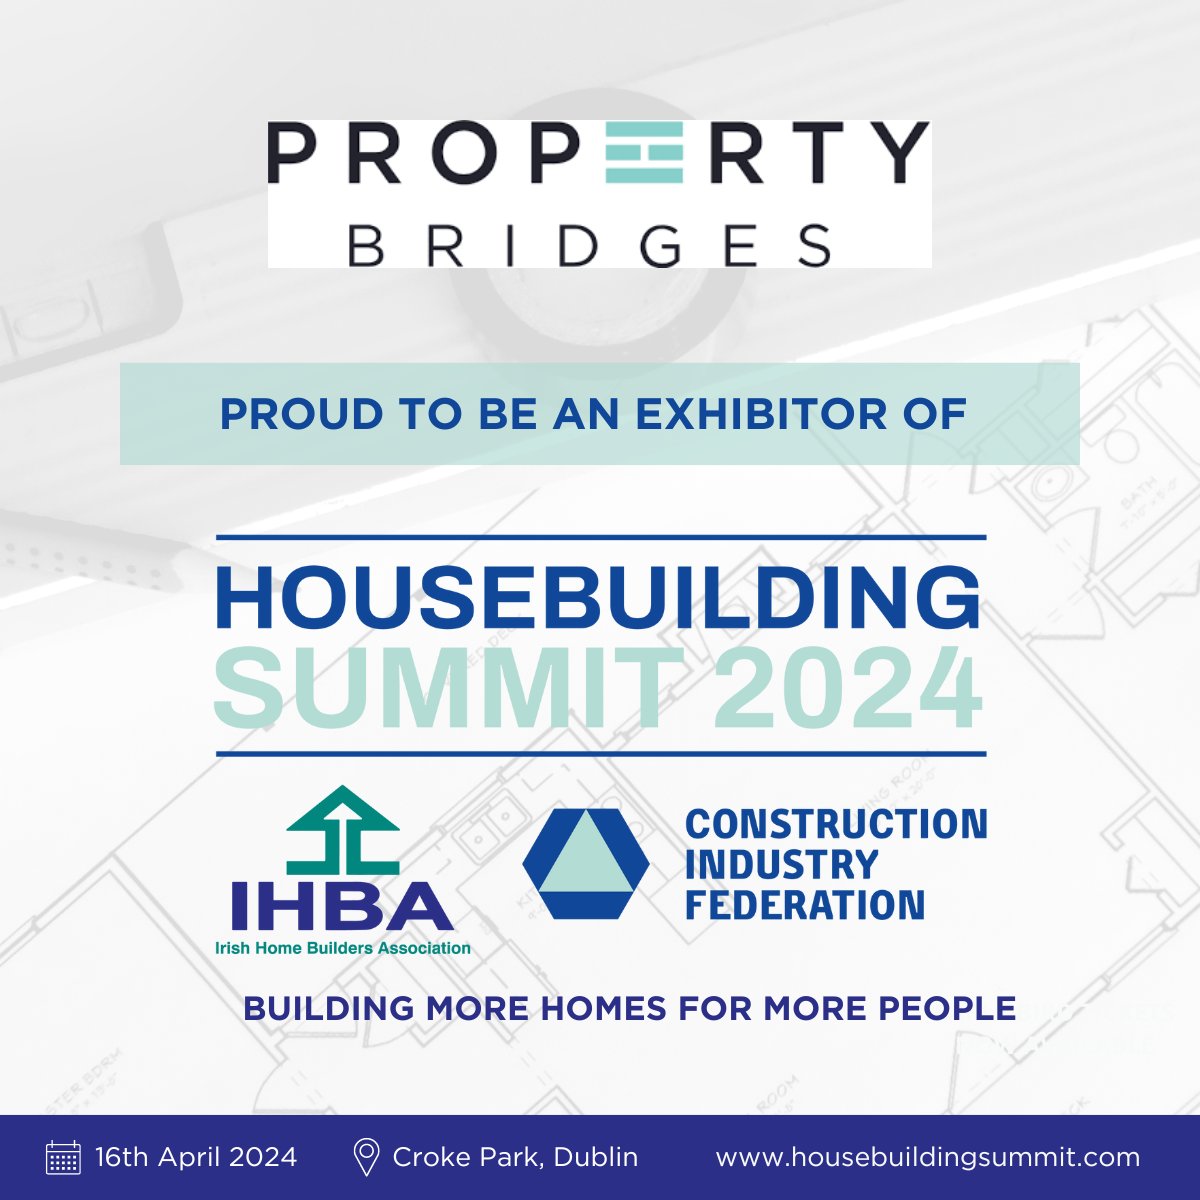 Property Bridges will be participating in the IHBA Housebuilding Summit 2024. Join to us tomorrow, 16th April 2024, in Croke Park, Dublin.